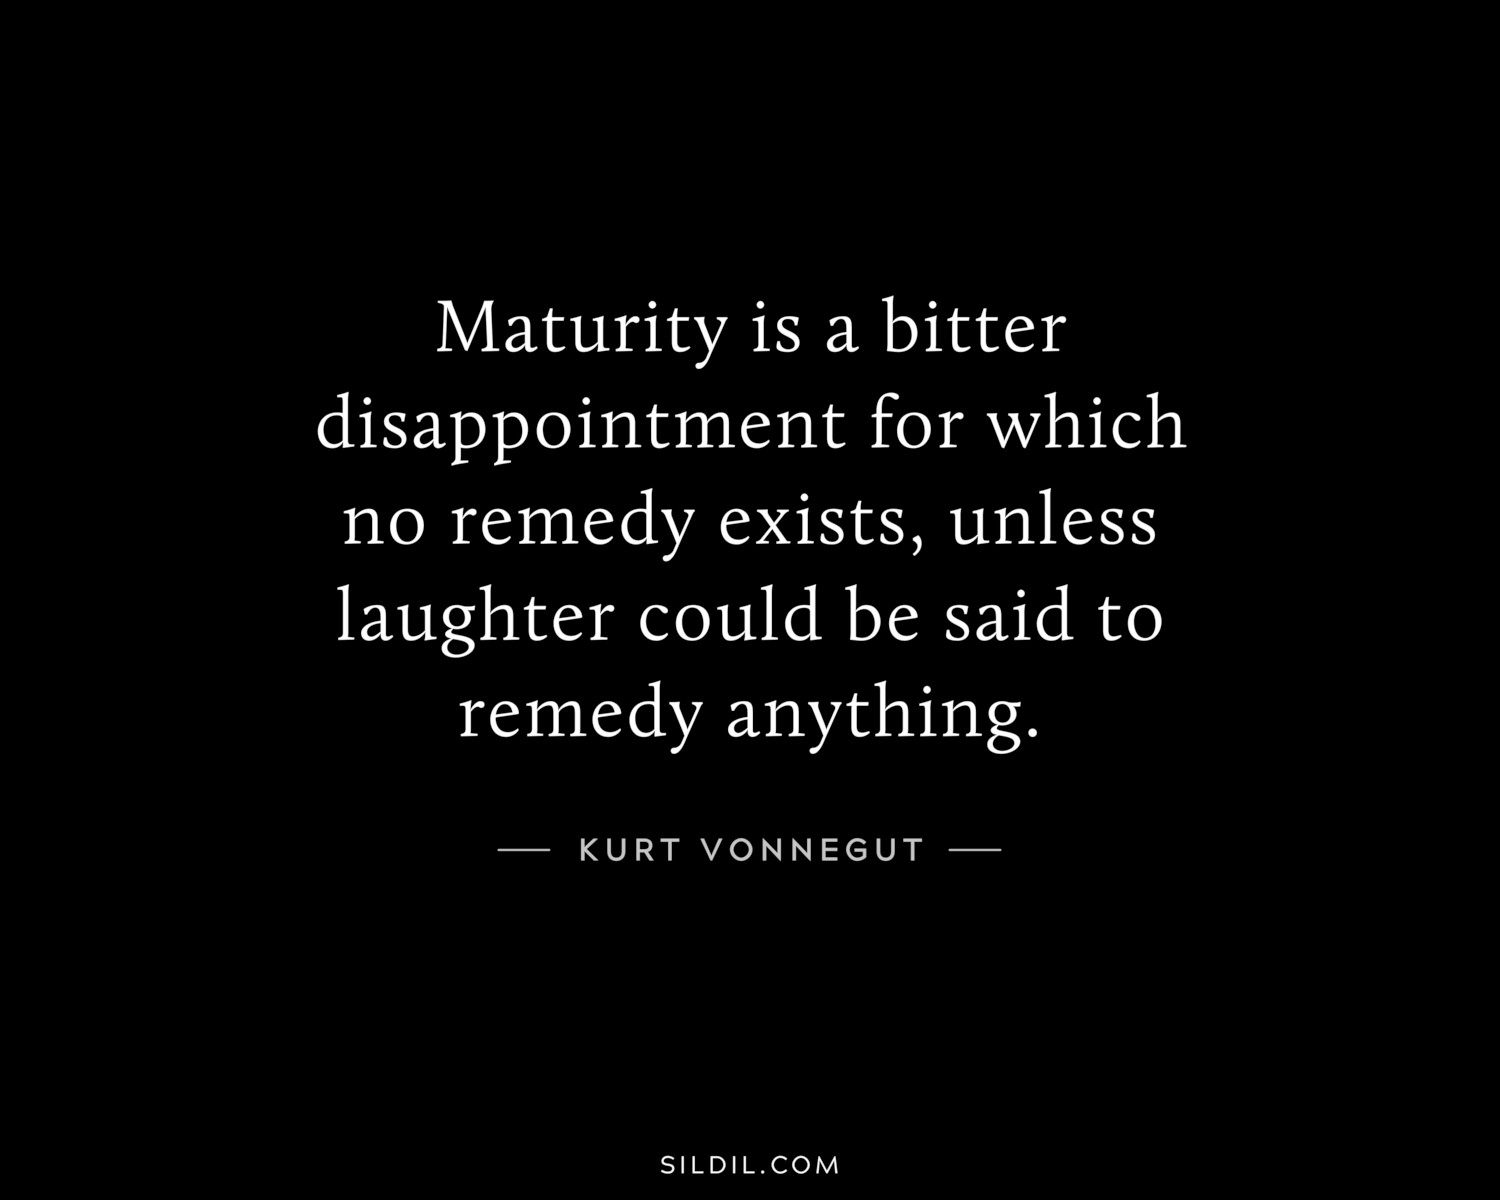 Maturity is a bitter disappointment for which no remedy exists, unless laughter could be said to remedy anything.